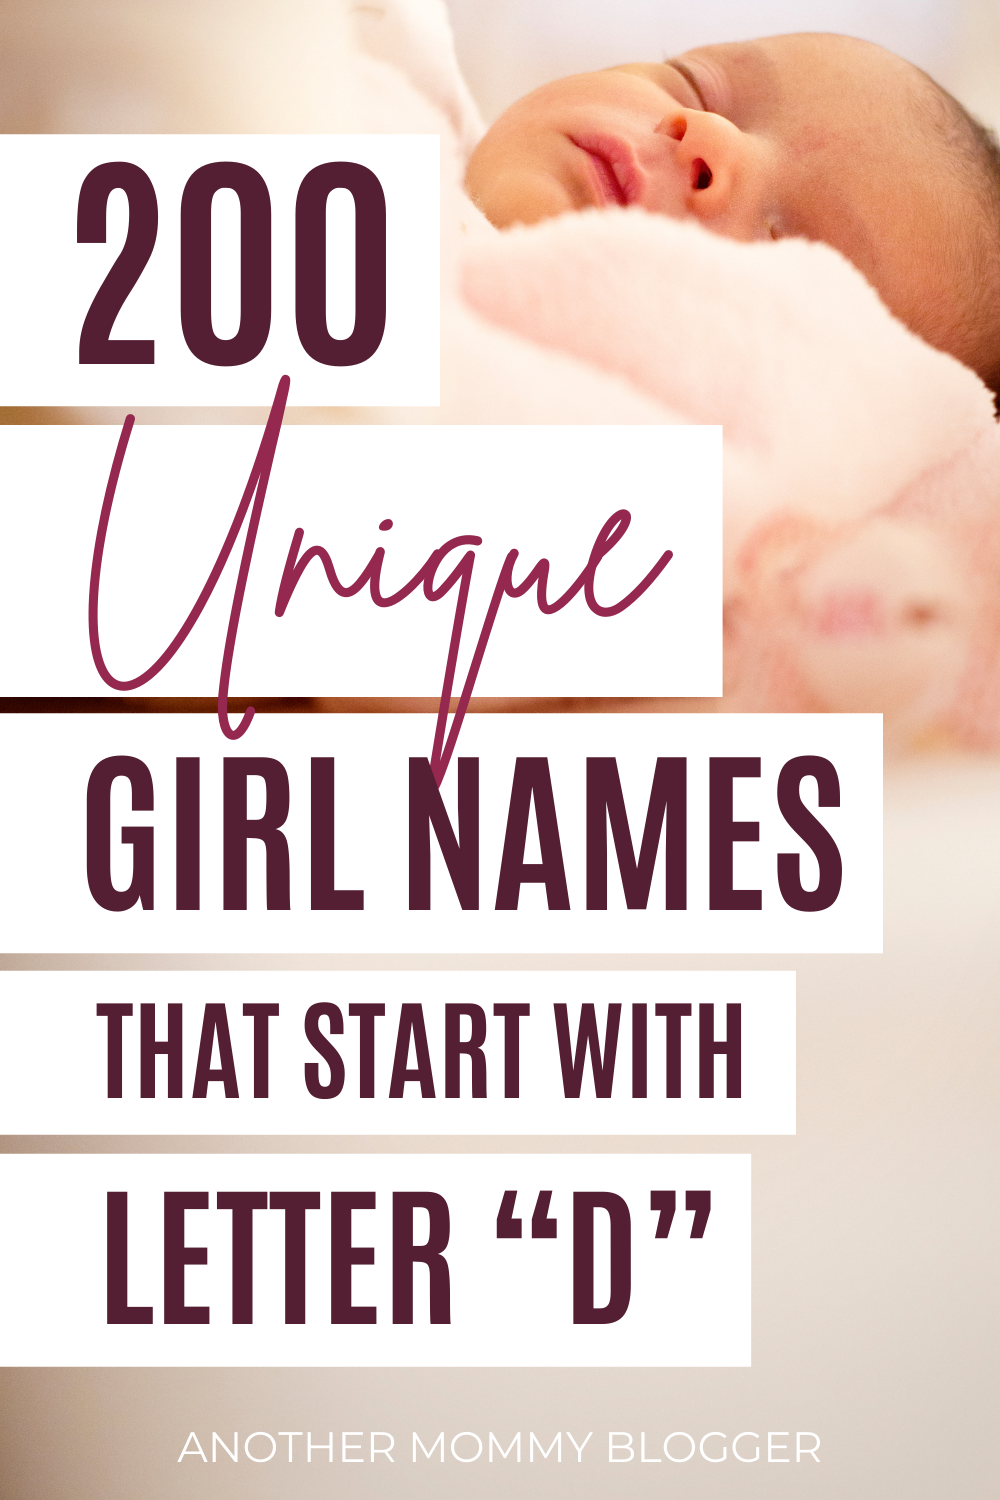 These baby girl names start with D and they’re so cute and unique. This is a list of girl names that start with letter D and their meanings.